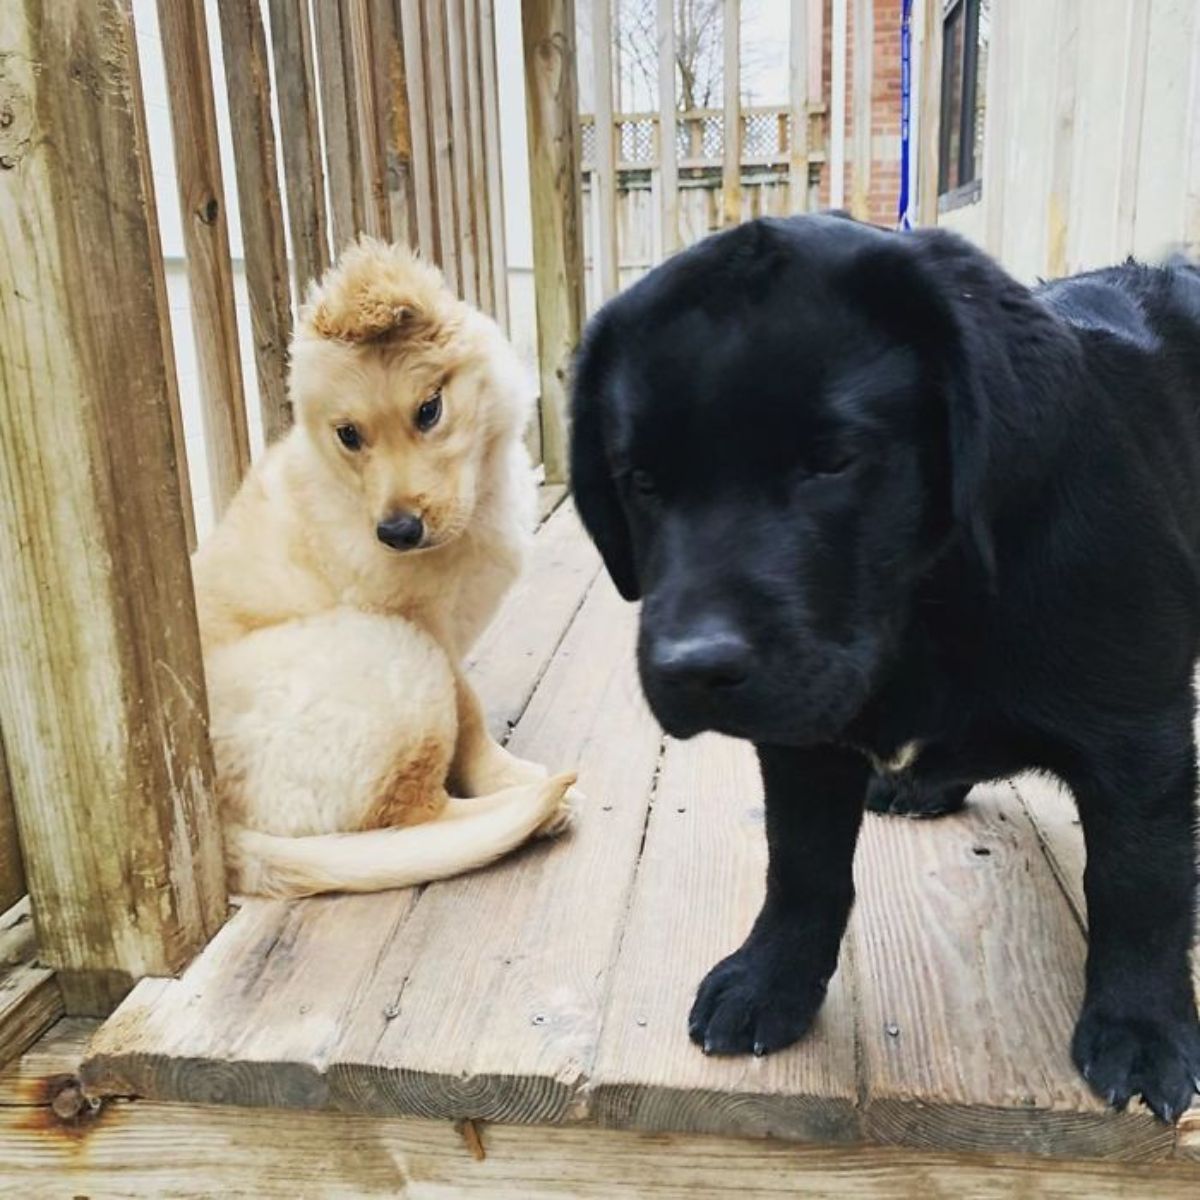 golden retriever puppy with one ear sitting on a wooden patio with a black labrador retriever puppy